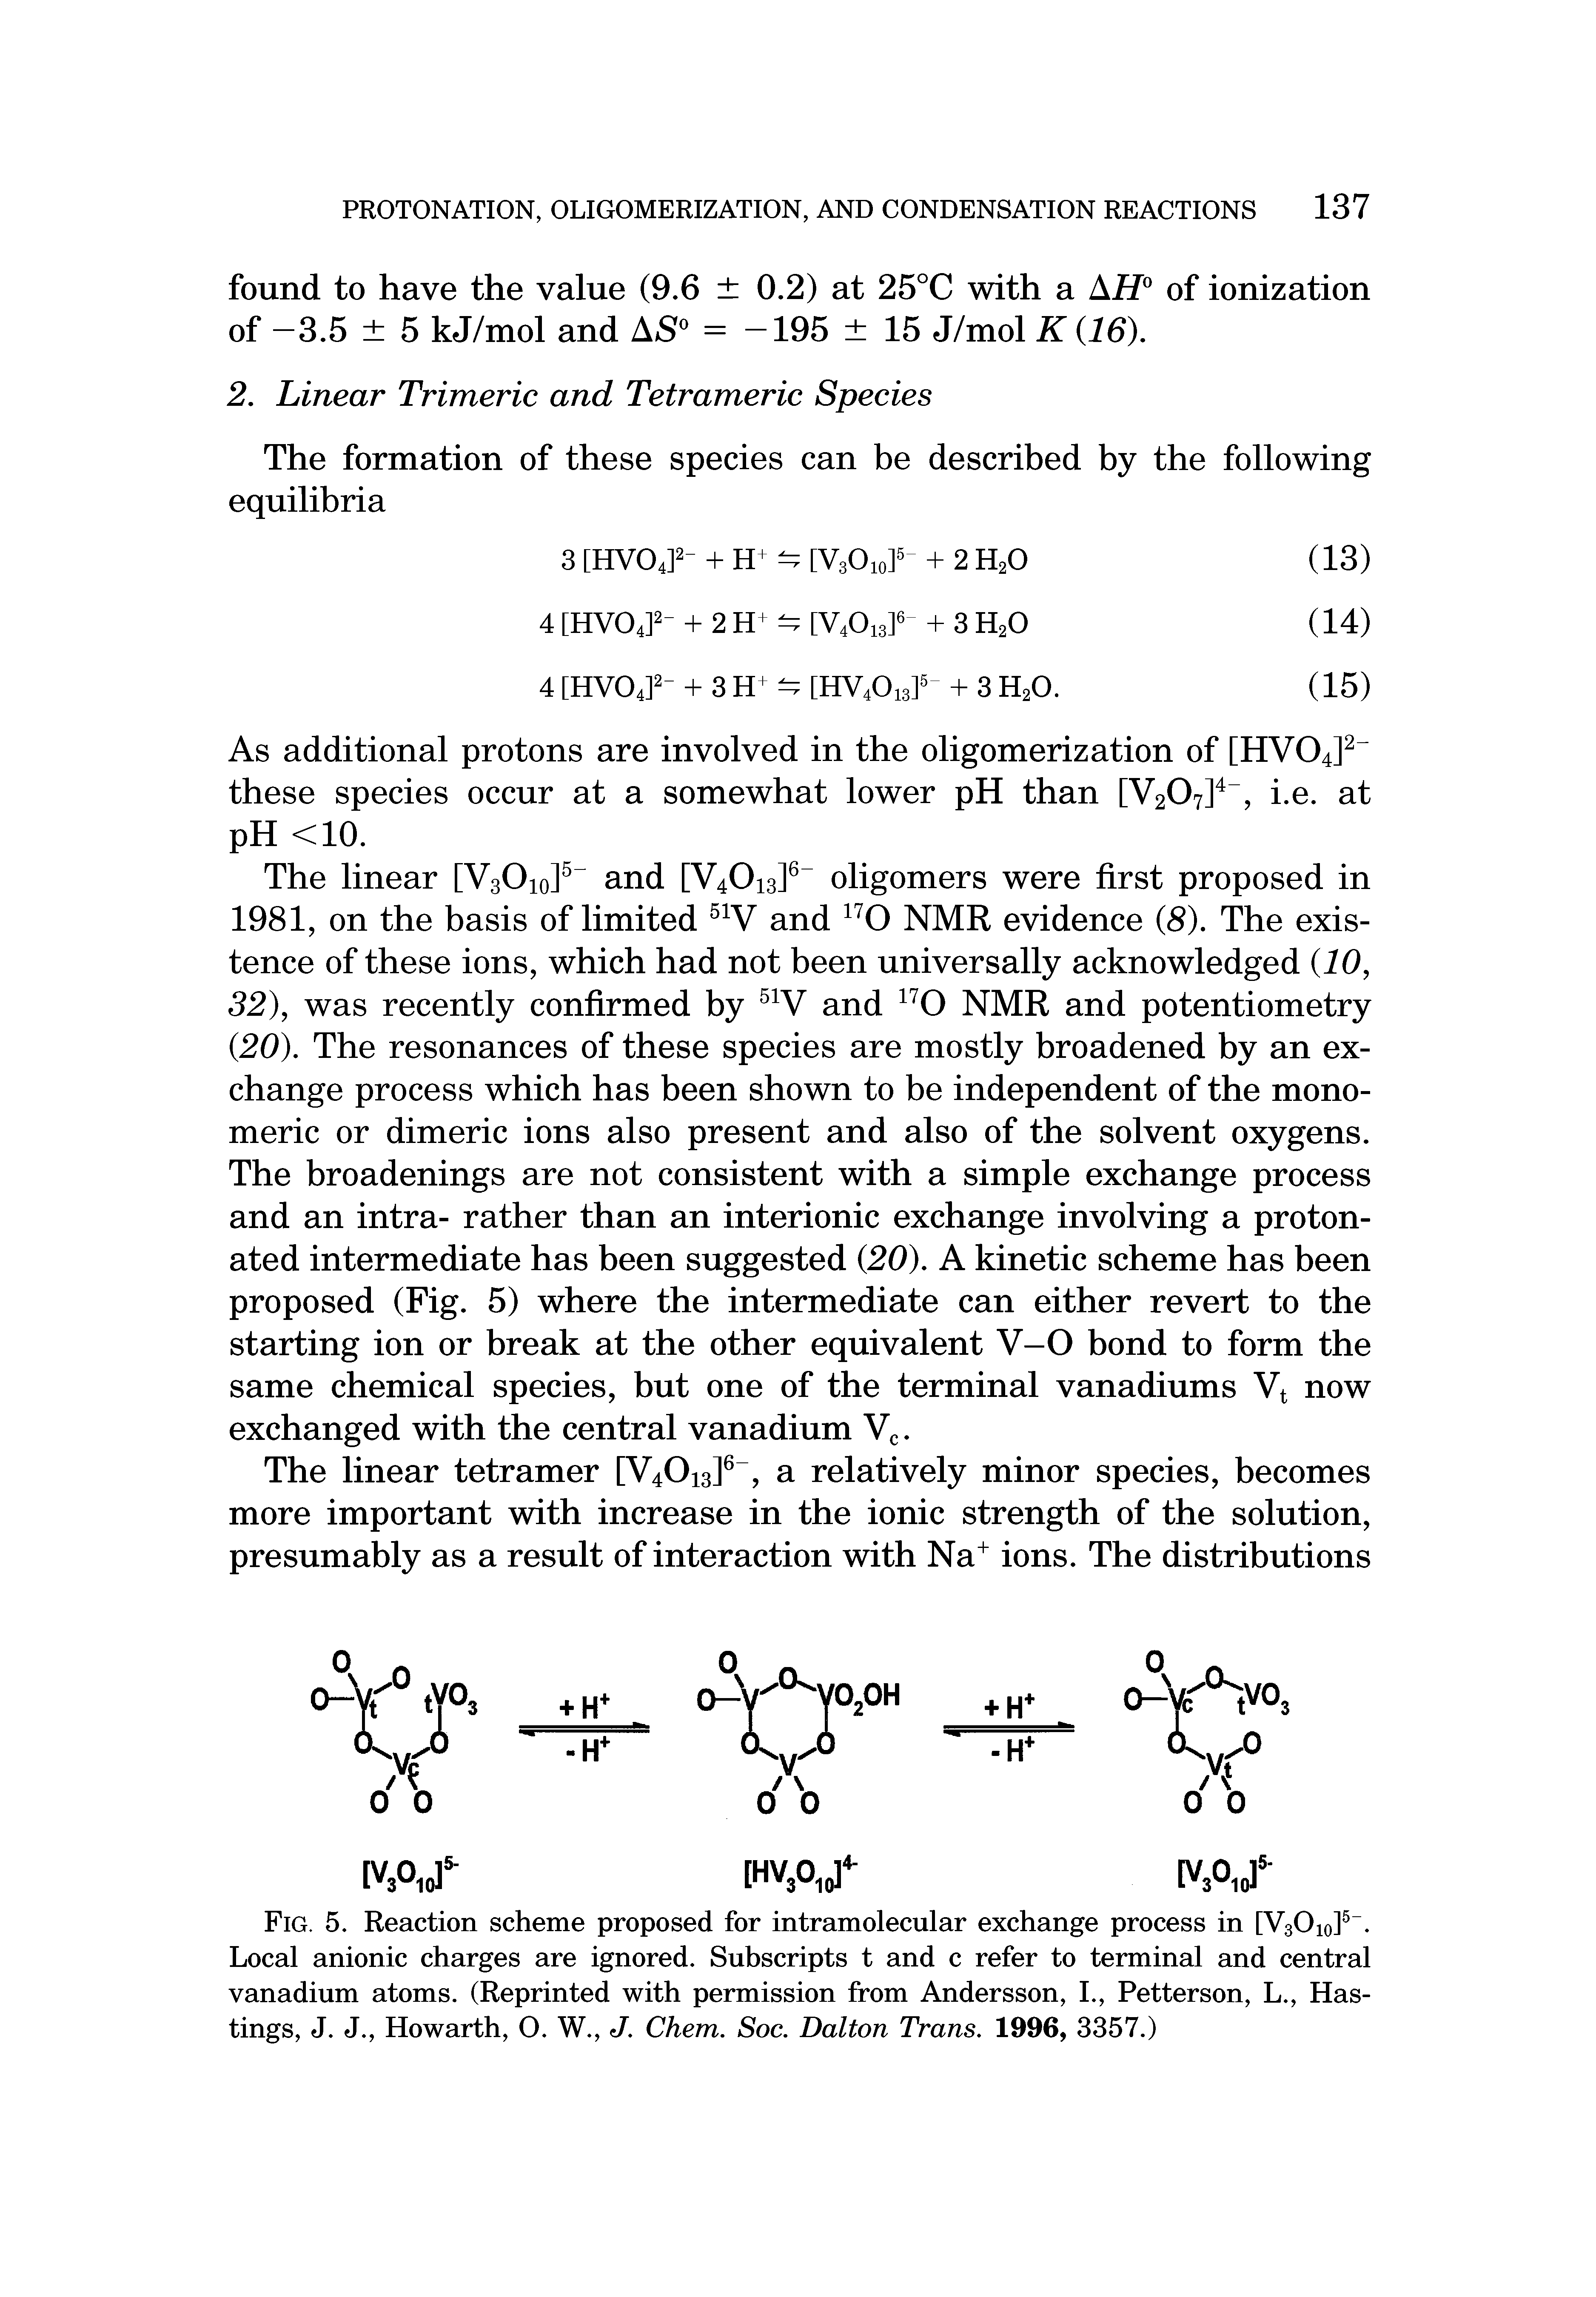 Fig. 5. Reaction scheme proposed for intramolecular exchange process in [V3Oi0]5. Local anionic charges are ignored. Subscripts t and c refer to terminal and central vanadium atoms. (Reprinted with permission from Andersson, I., Petterson, L., Hastings, J. J., Howarth, O. W., J. Chem. Soc. Dalton Trans. 1996, 3357.)...